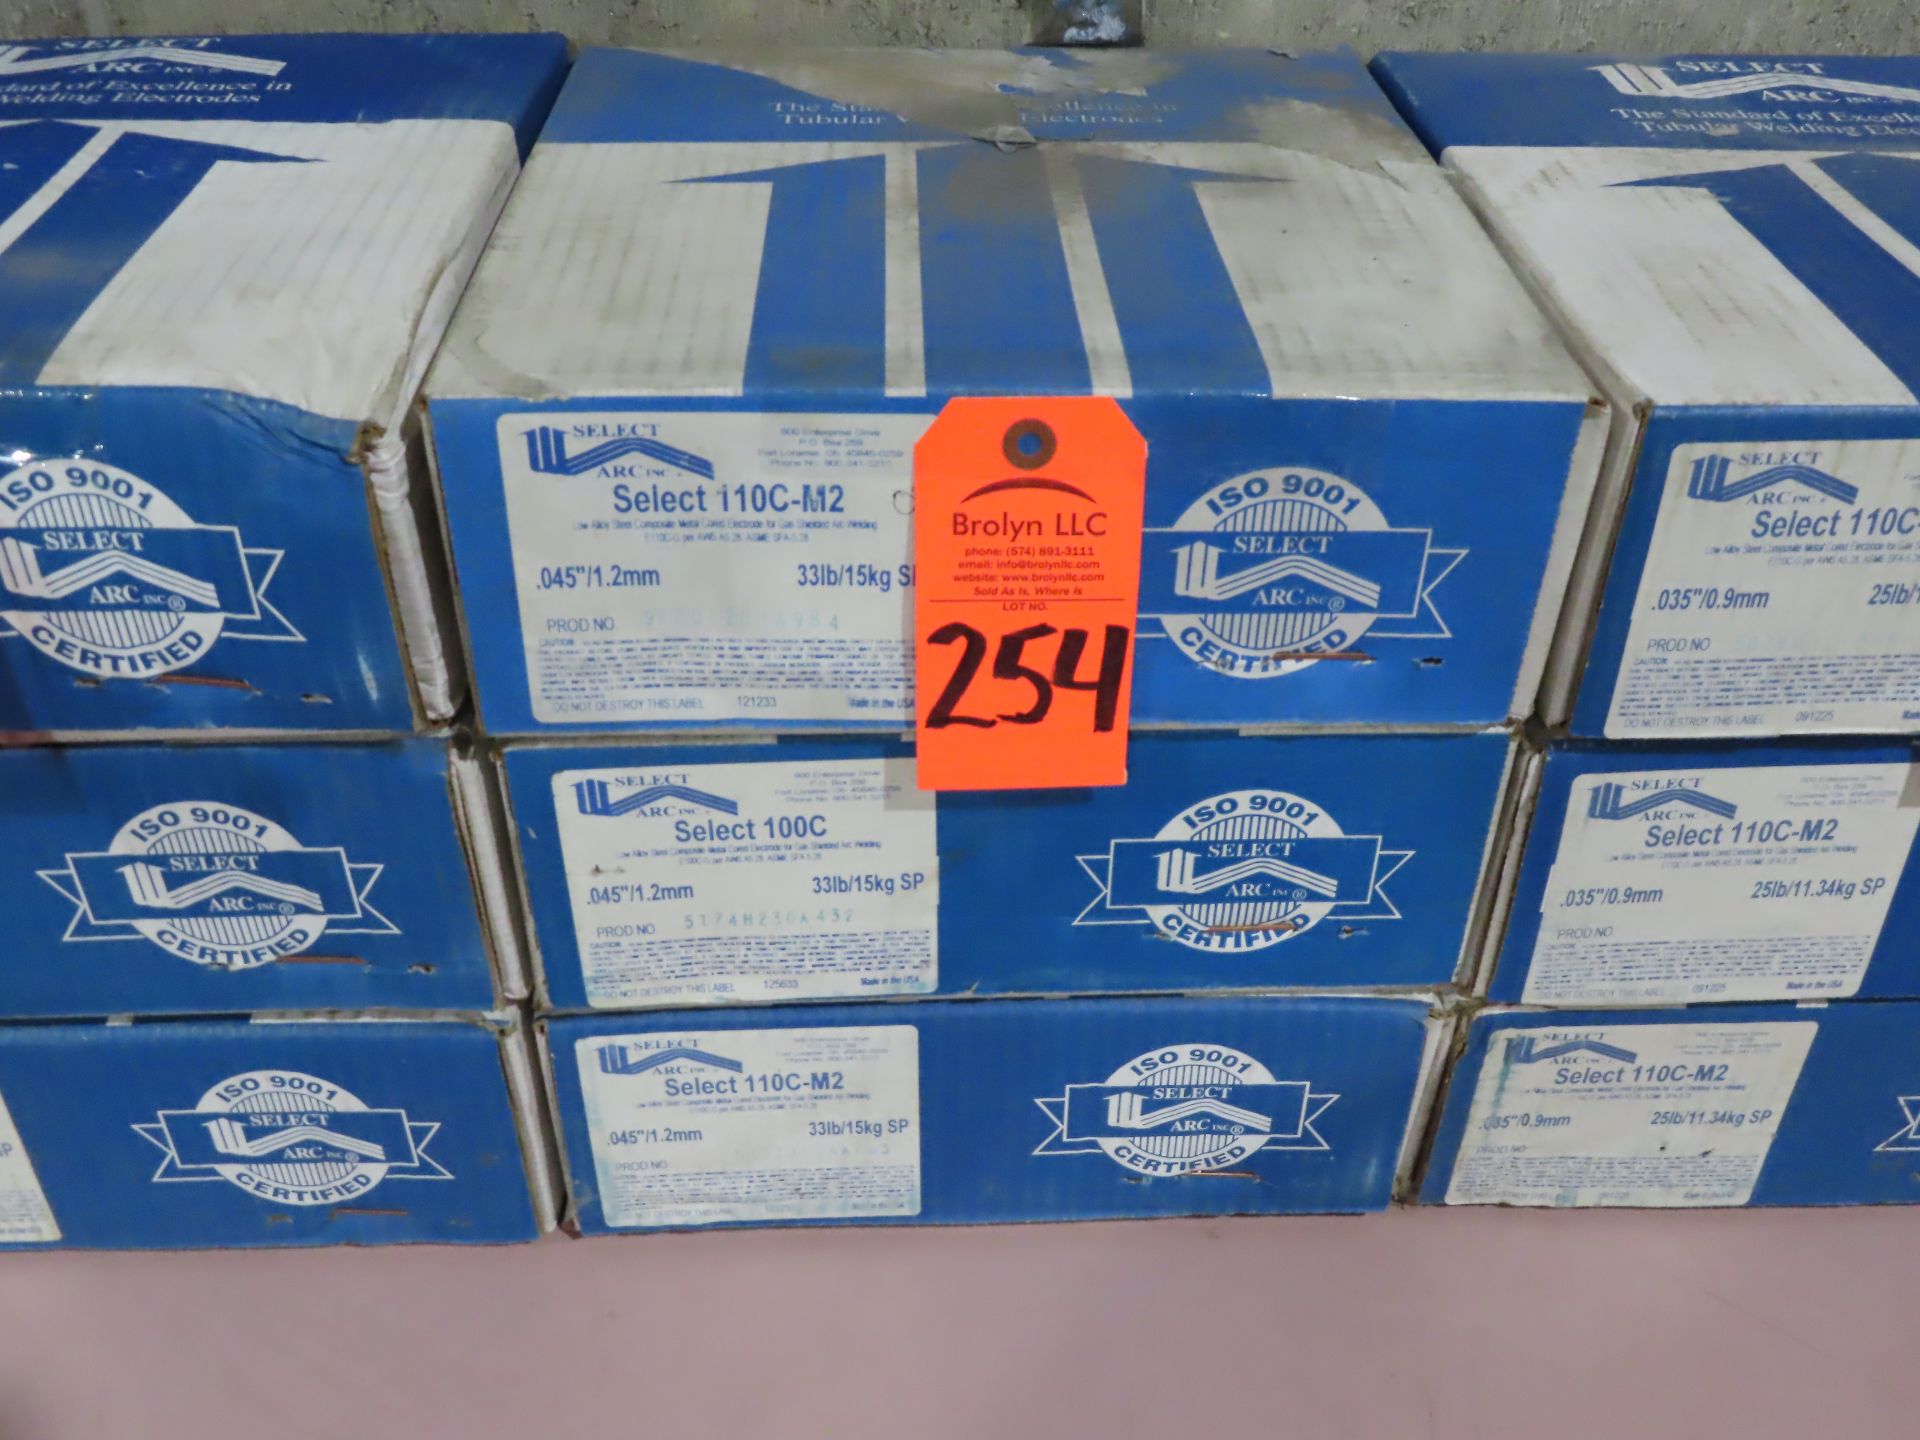 (Qty 3) Select Arc welding wire boxes. Model 110C-M2. .045", 33lb boxes. This item can be picked